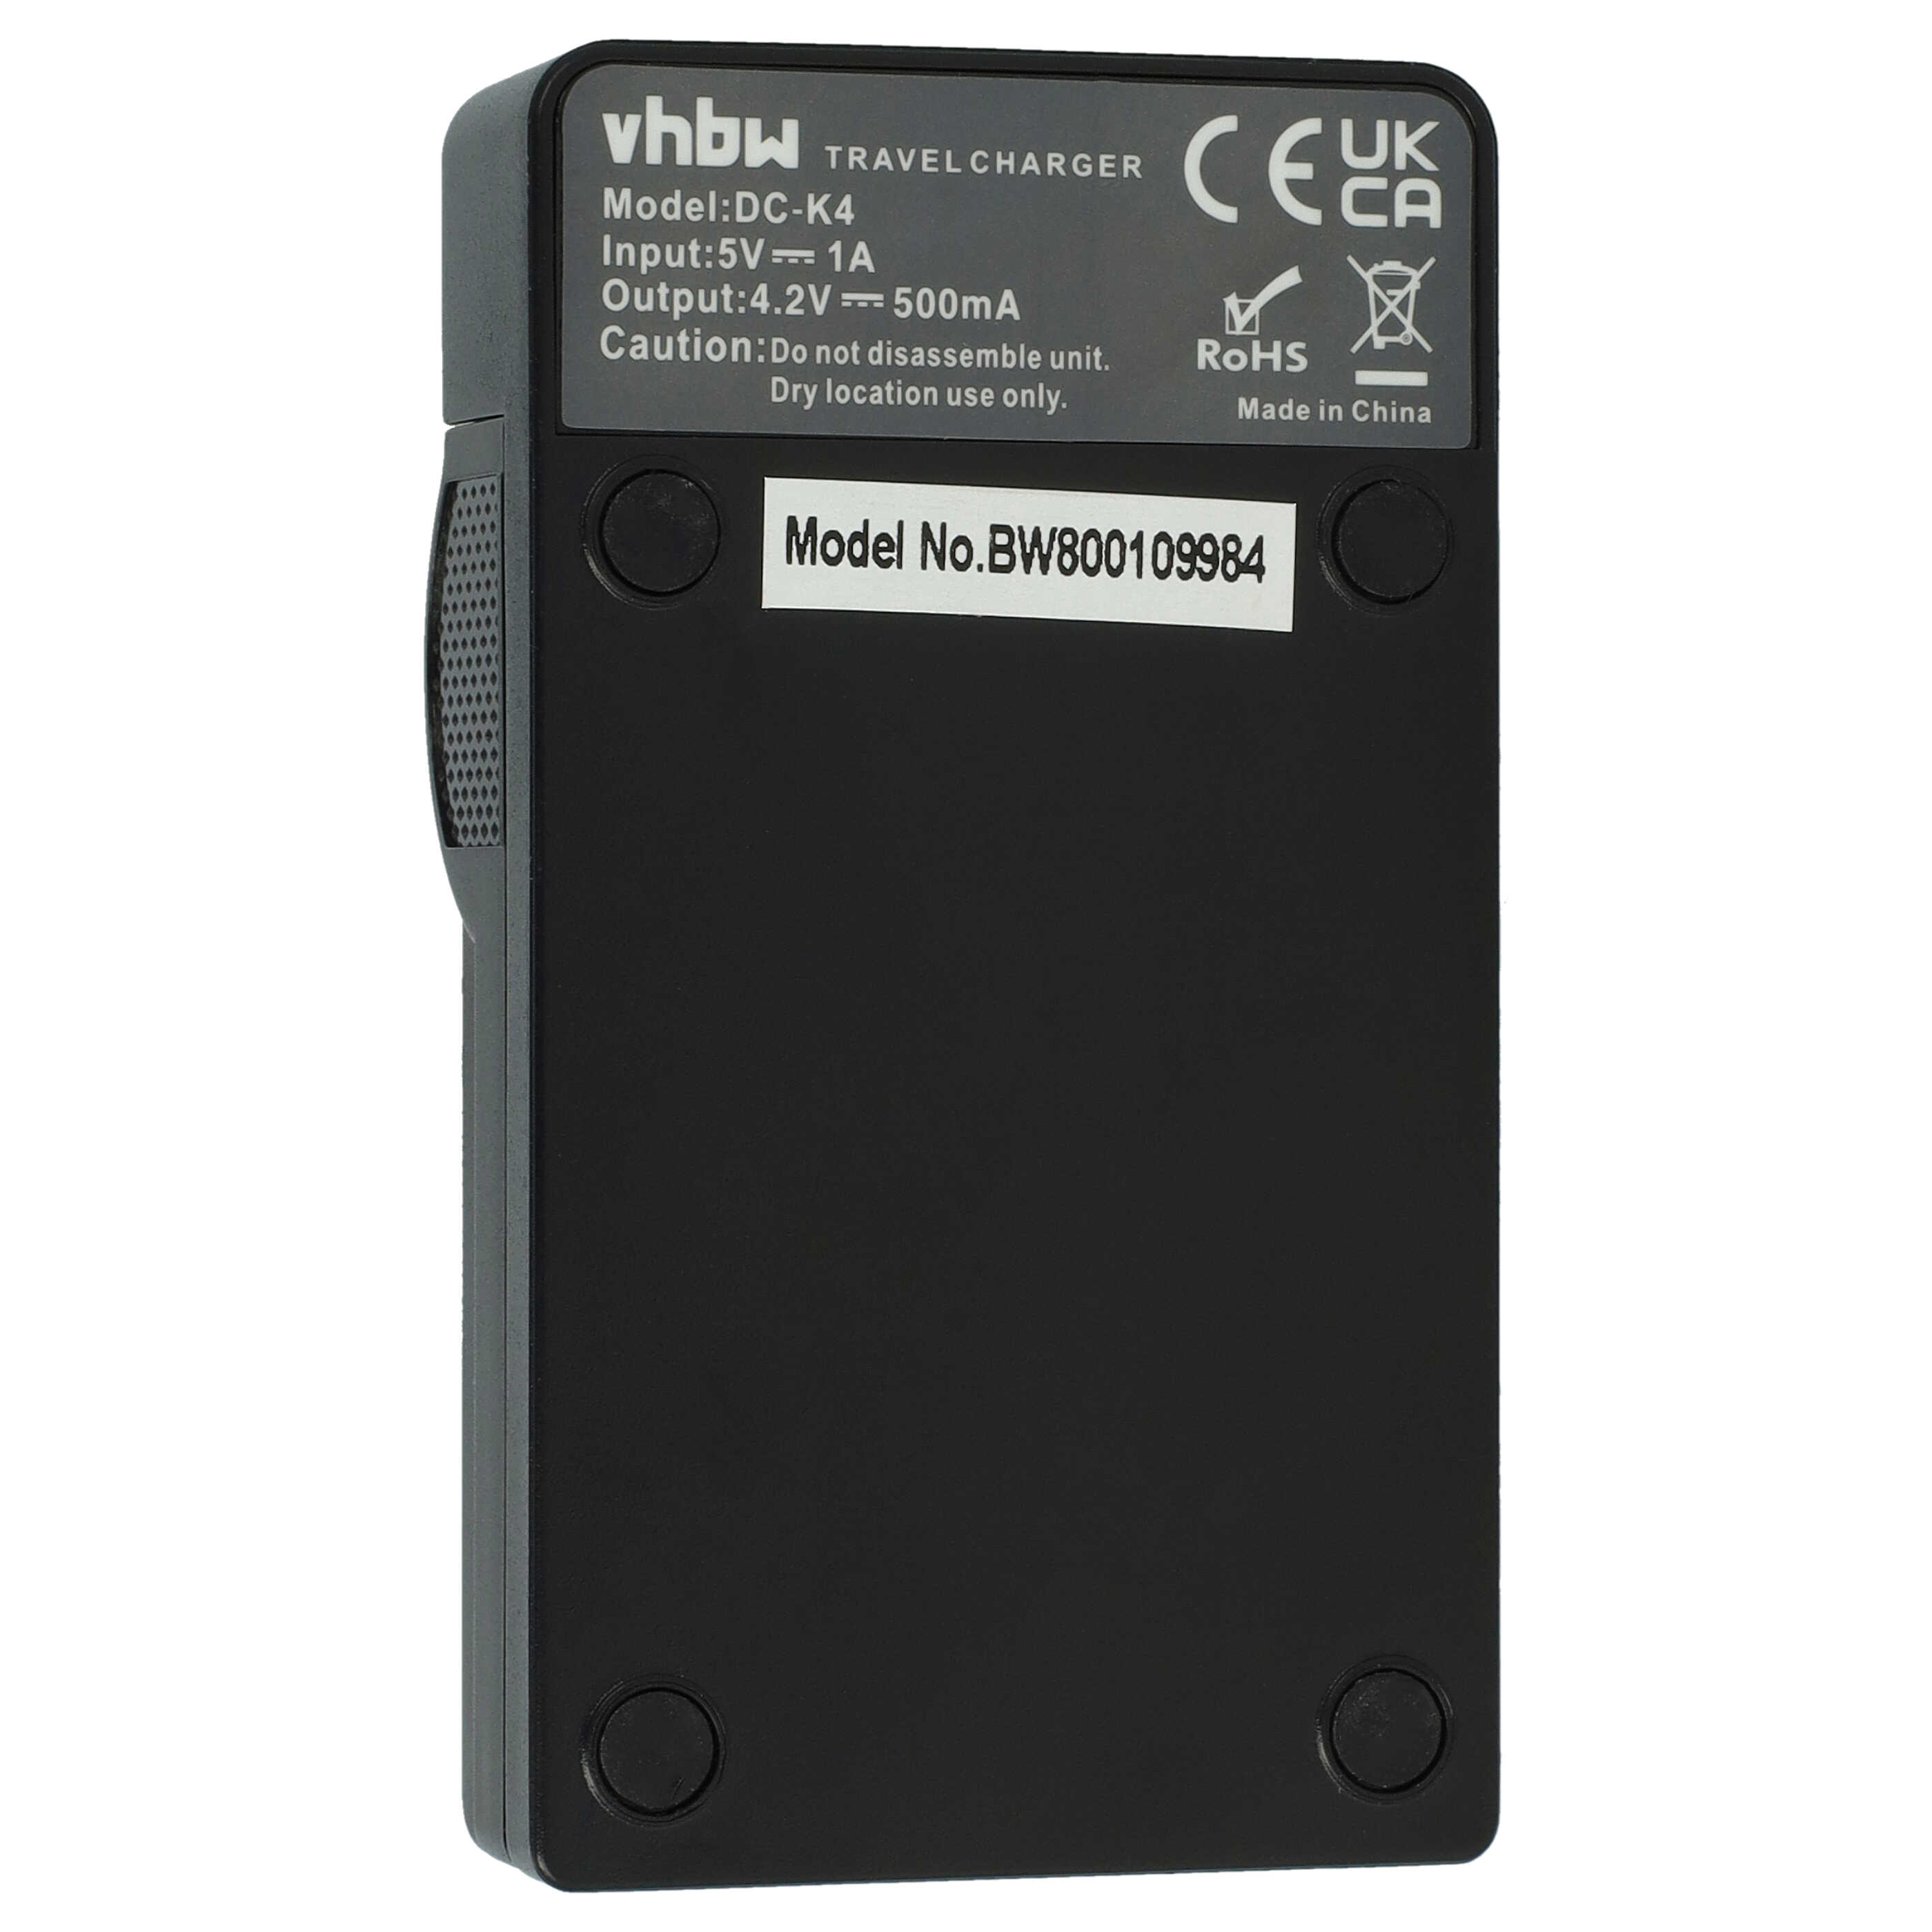 Battery Charger suitable for C Camera etc. - 0.5 A, 4.2 V